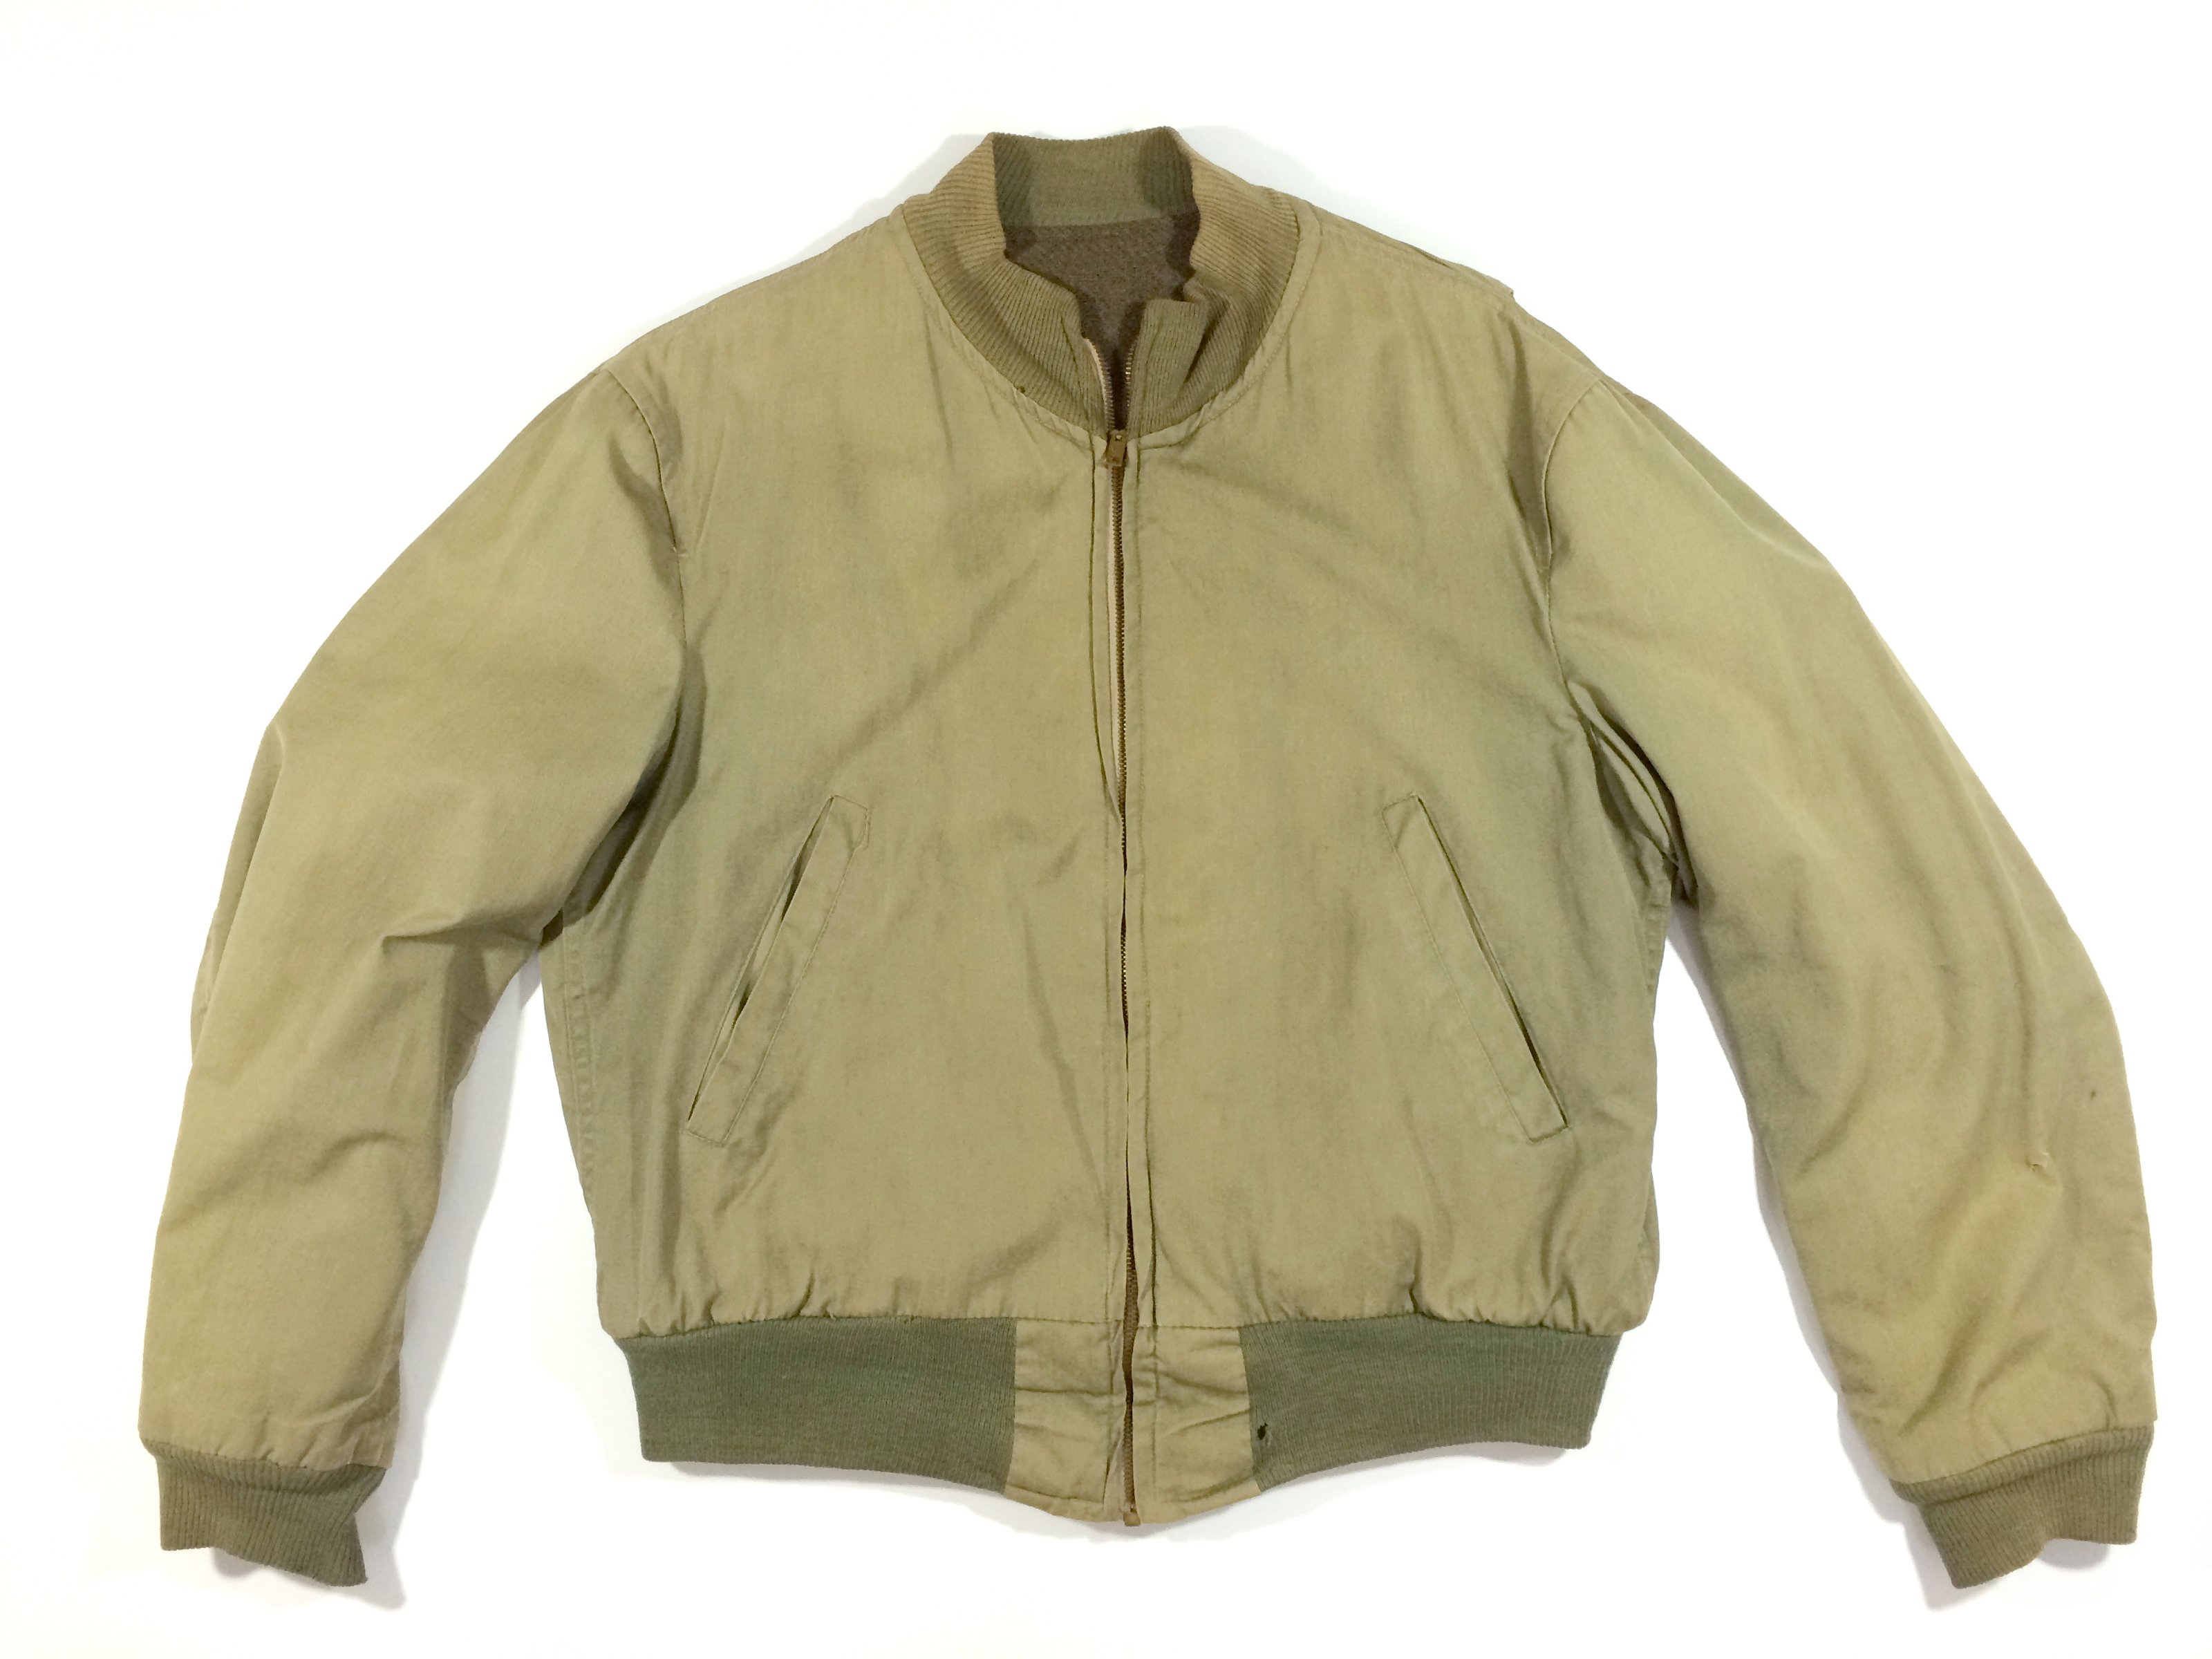 Image of US ARMY TANKER JACKET